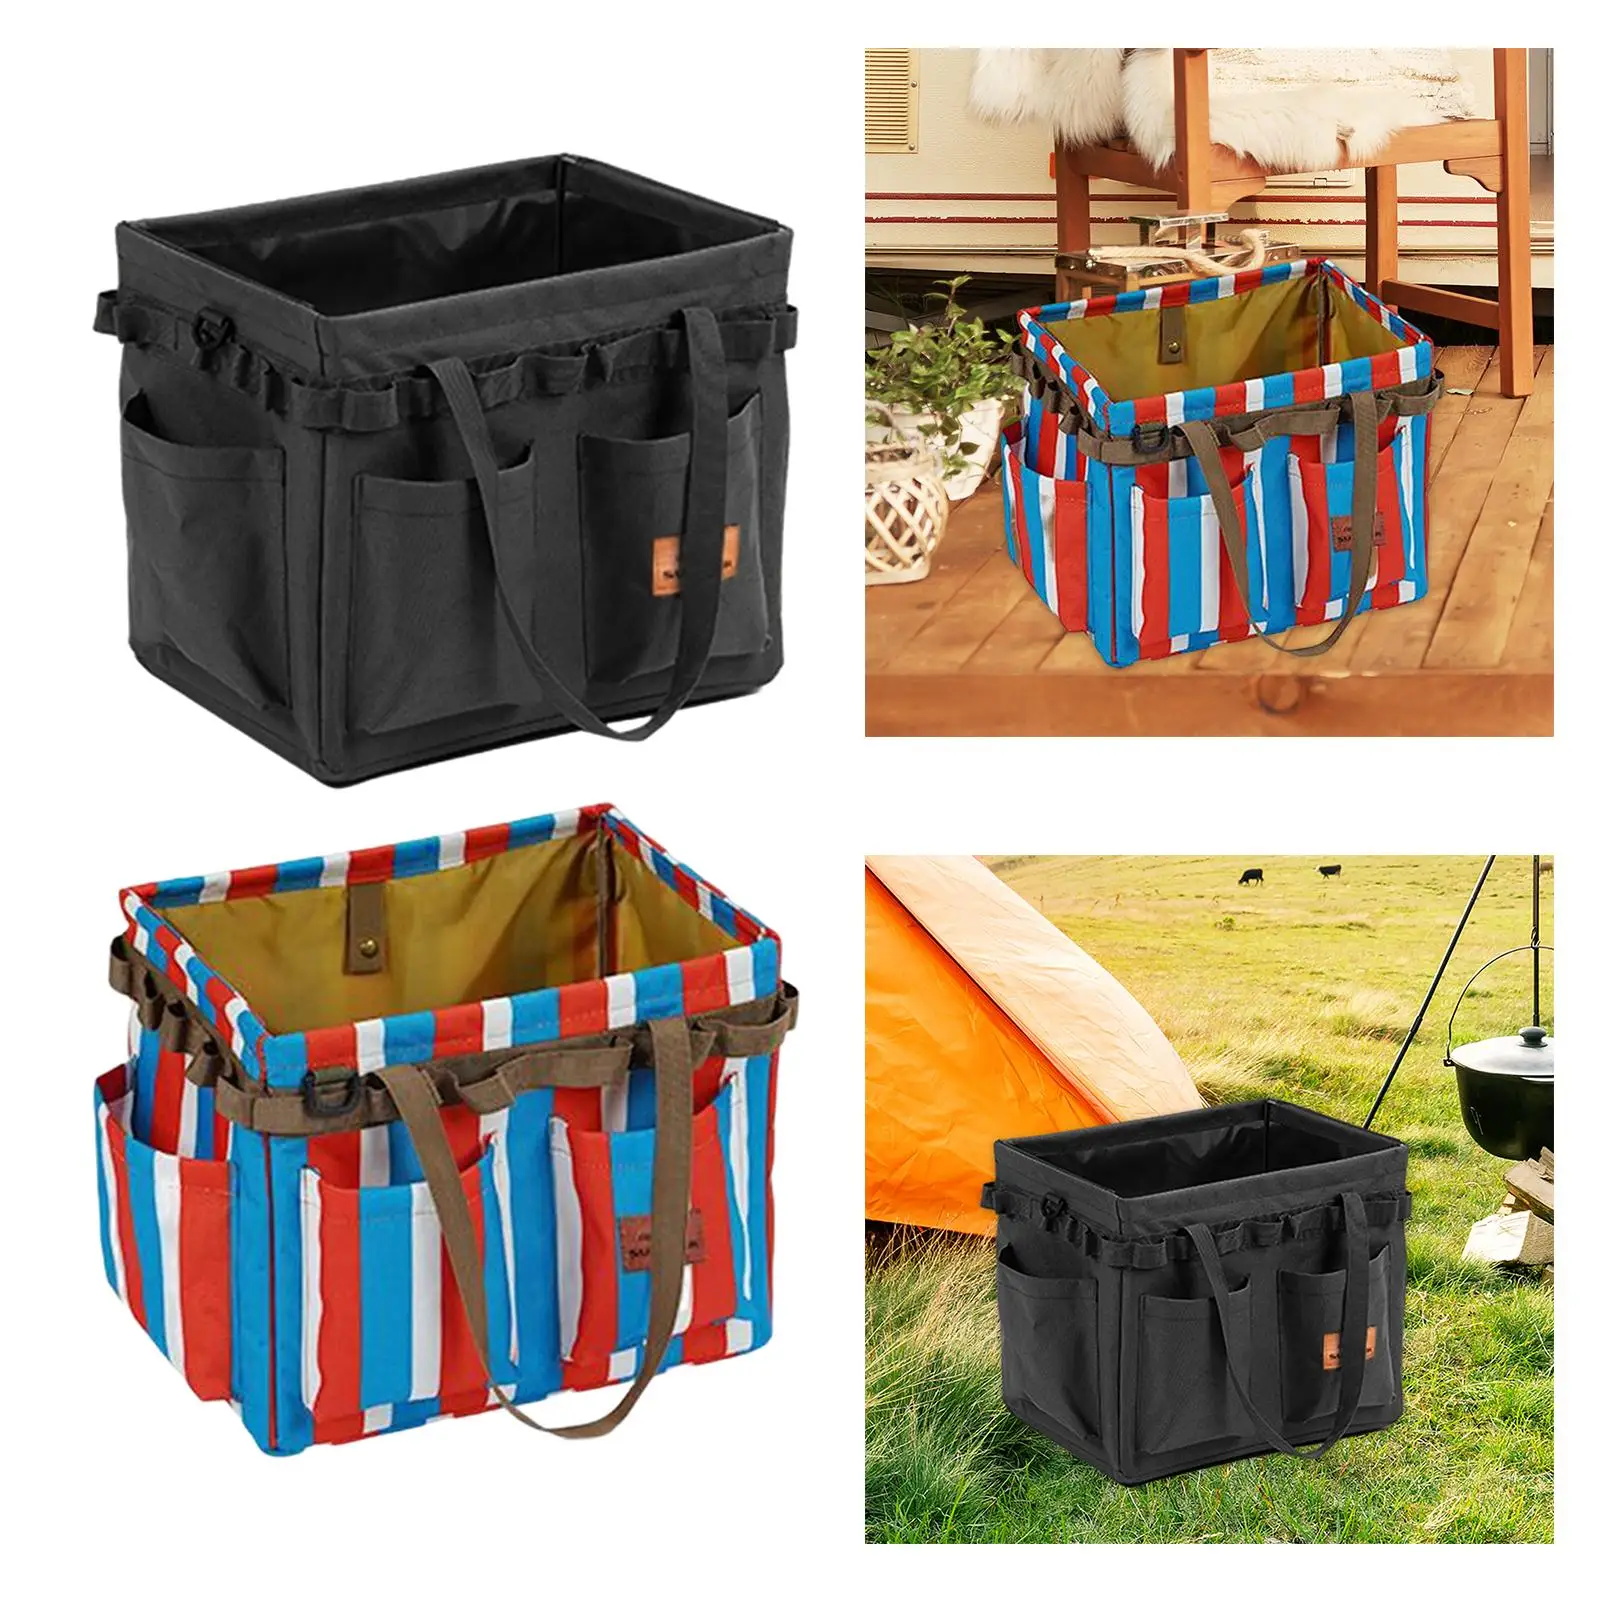 Utility Tote Tool Organizer Container Case Beach Picnic Camping Storage Bag